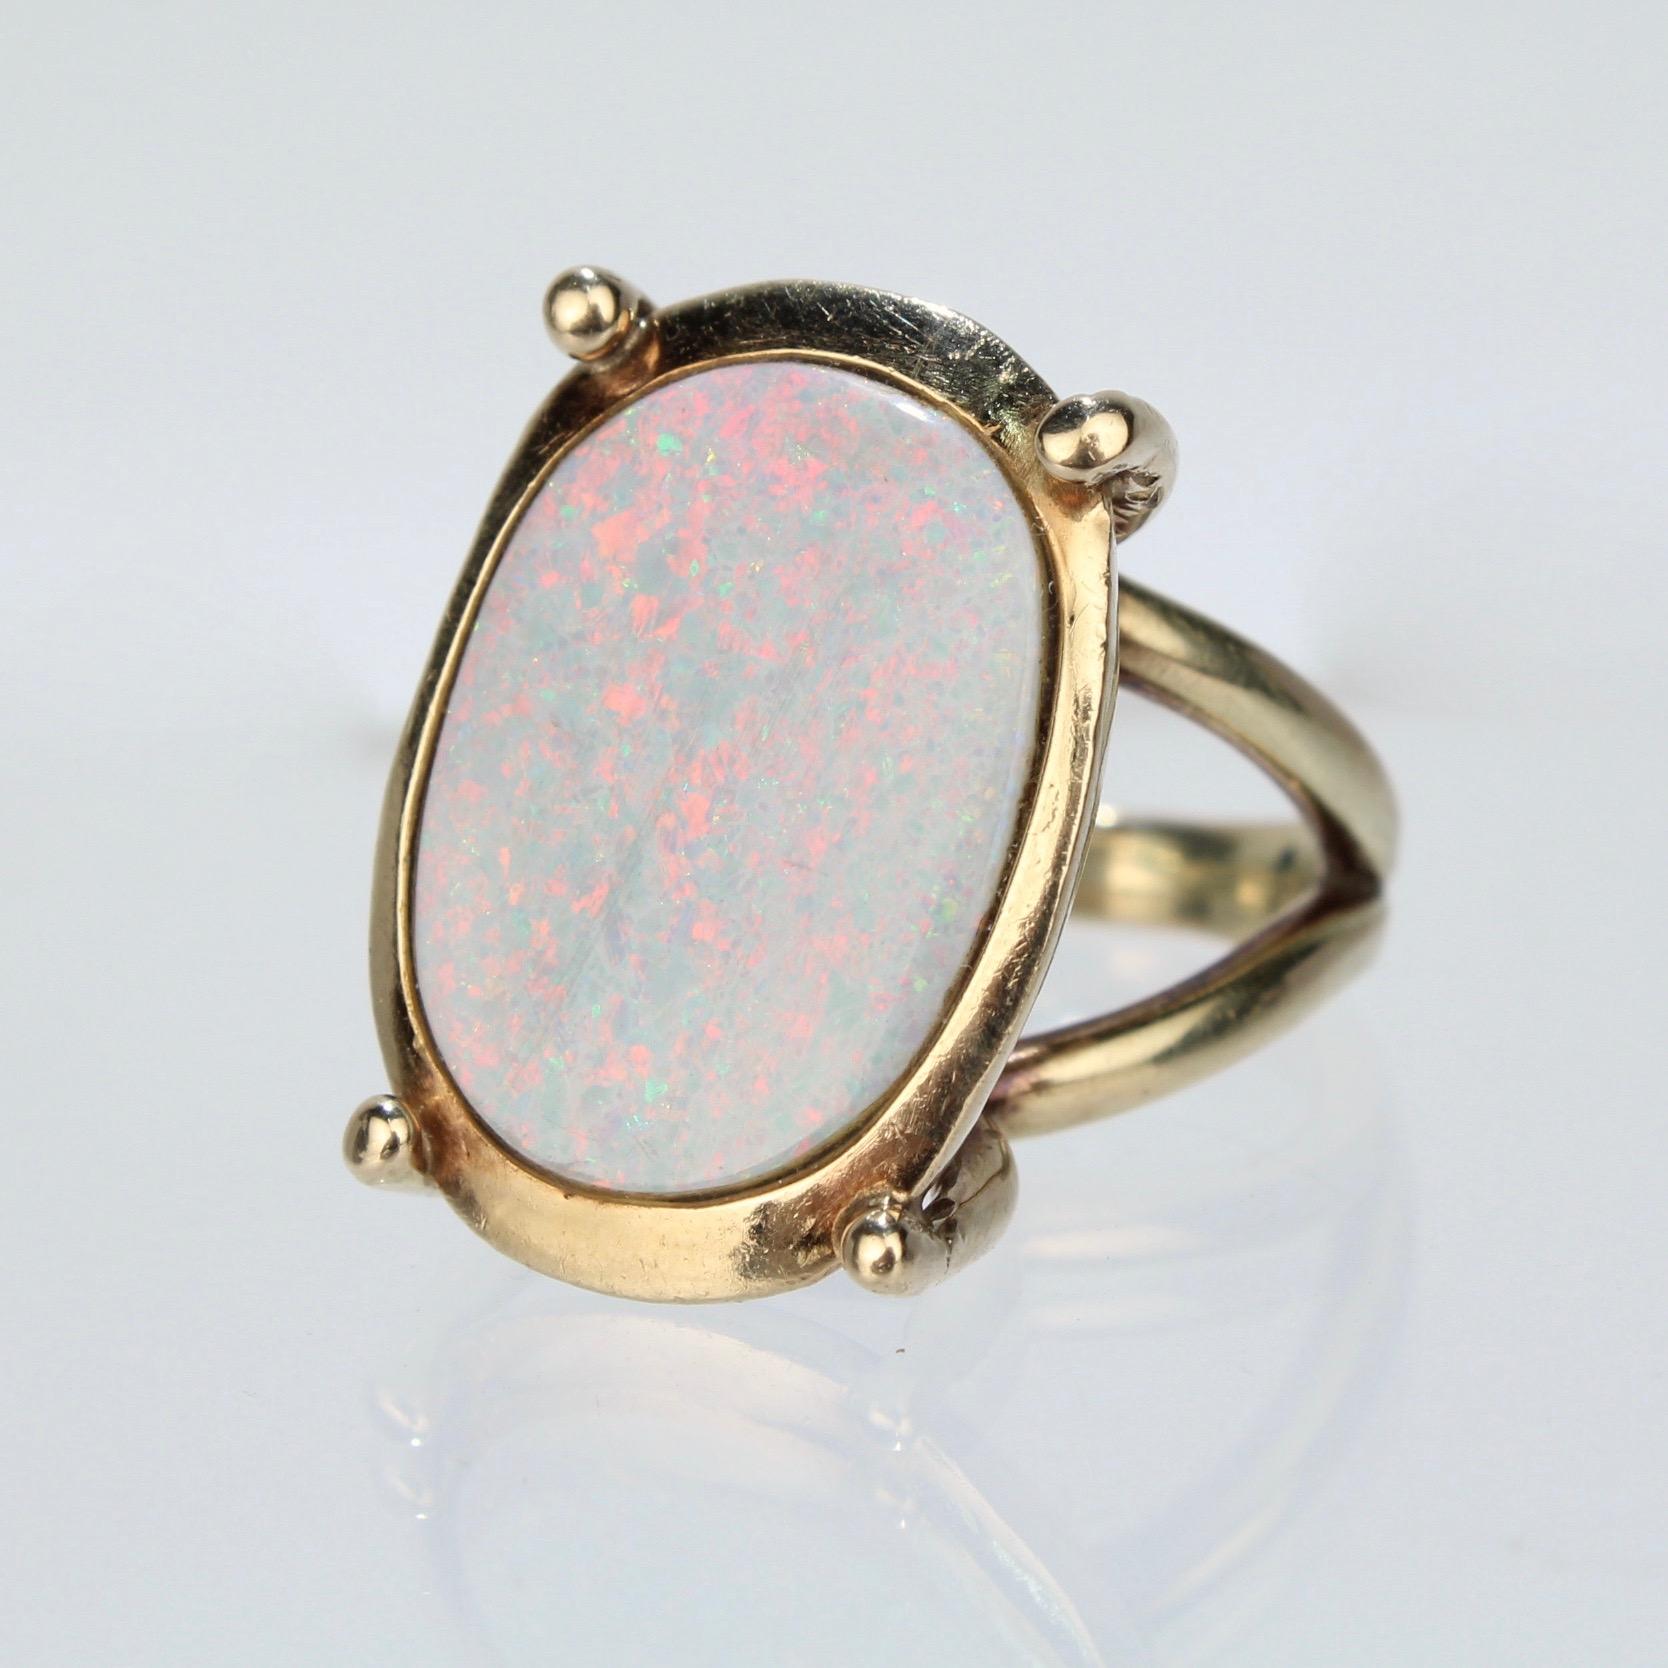 A terrific modernist Opal cocktail ring.

With an oval bezel set opal gemstone mounted in a high-prong setting.

The split shank is asymmetrical and is balanced to show the opal beautifully on the hand.

Unmarked for gold fineness. Professionally